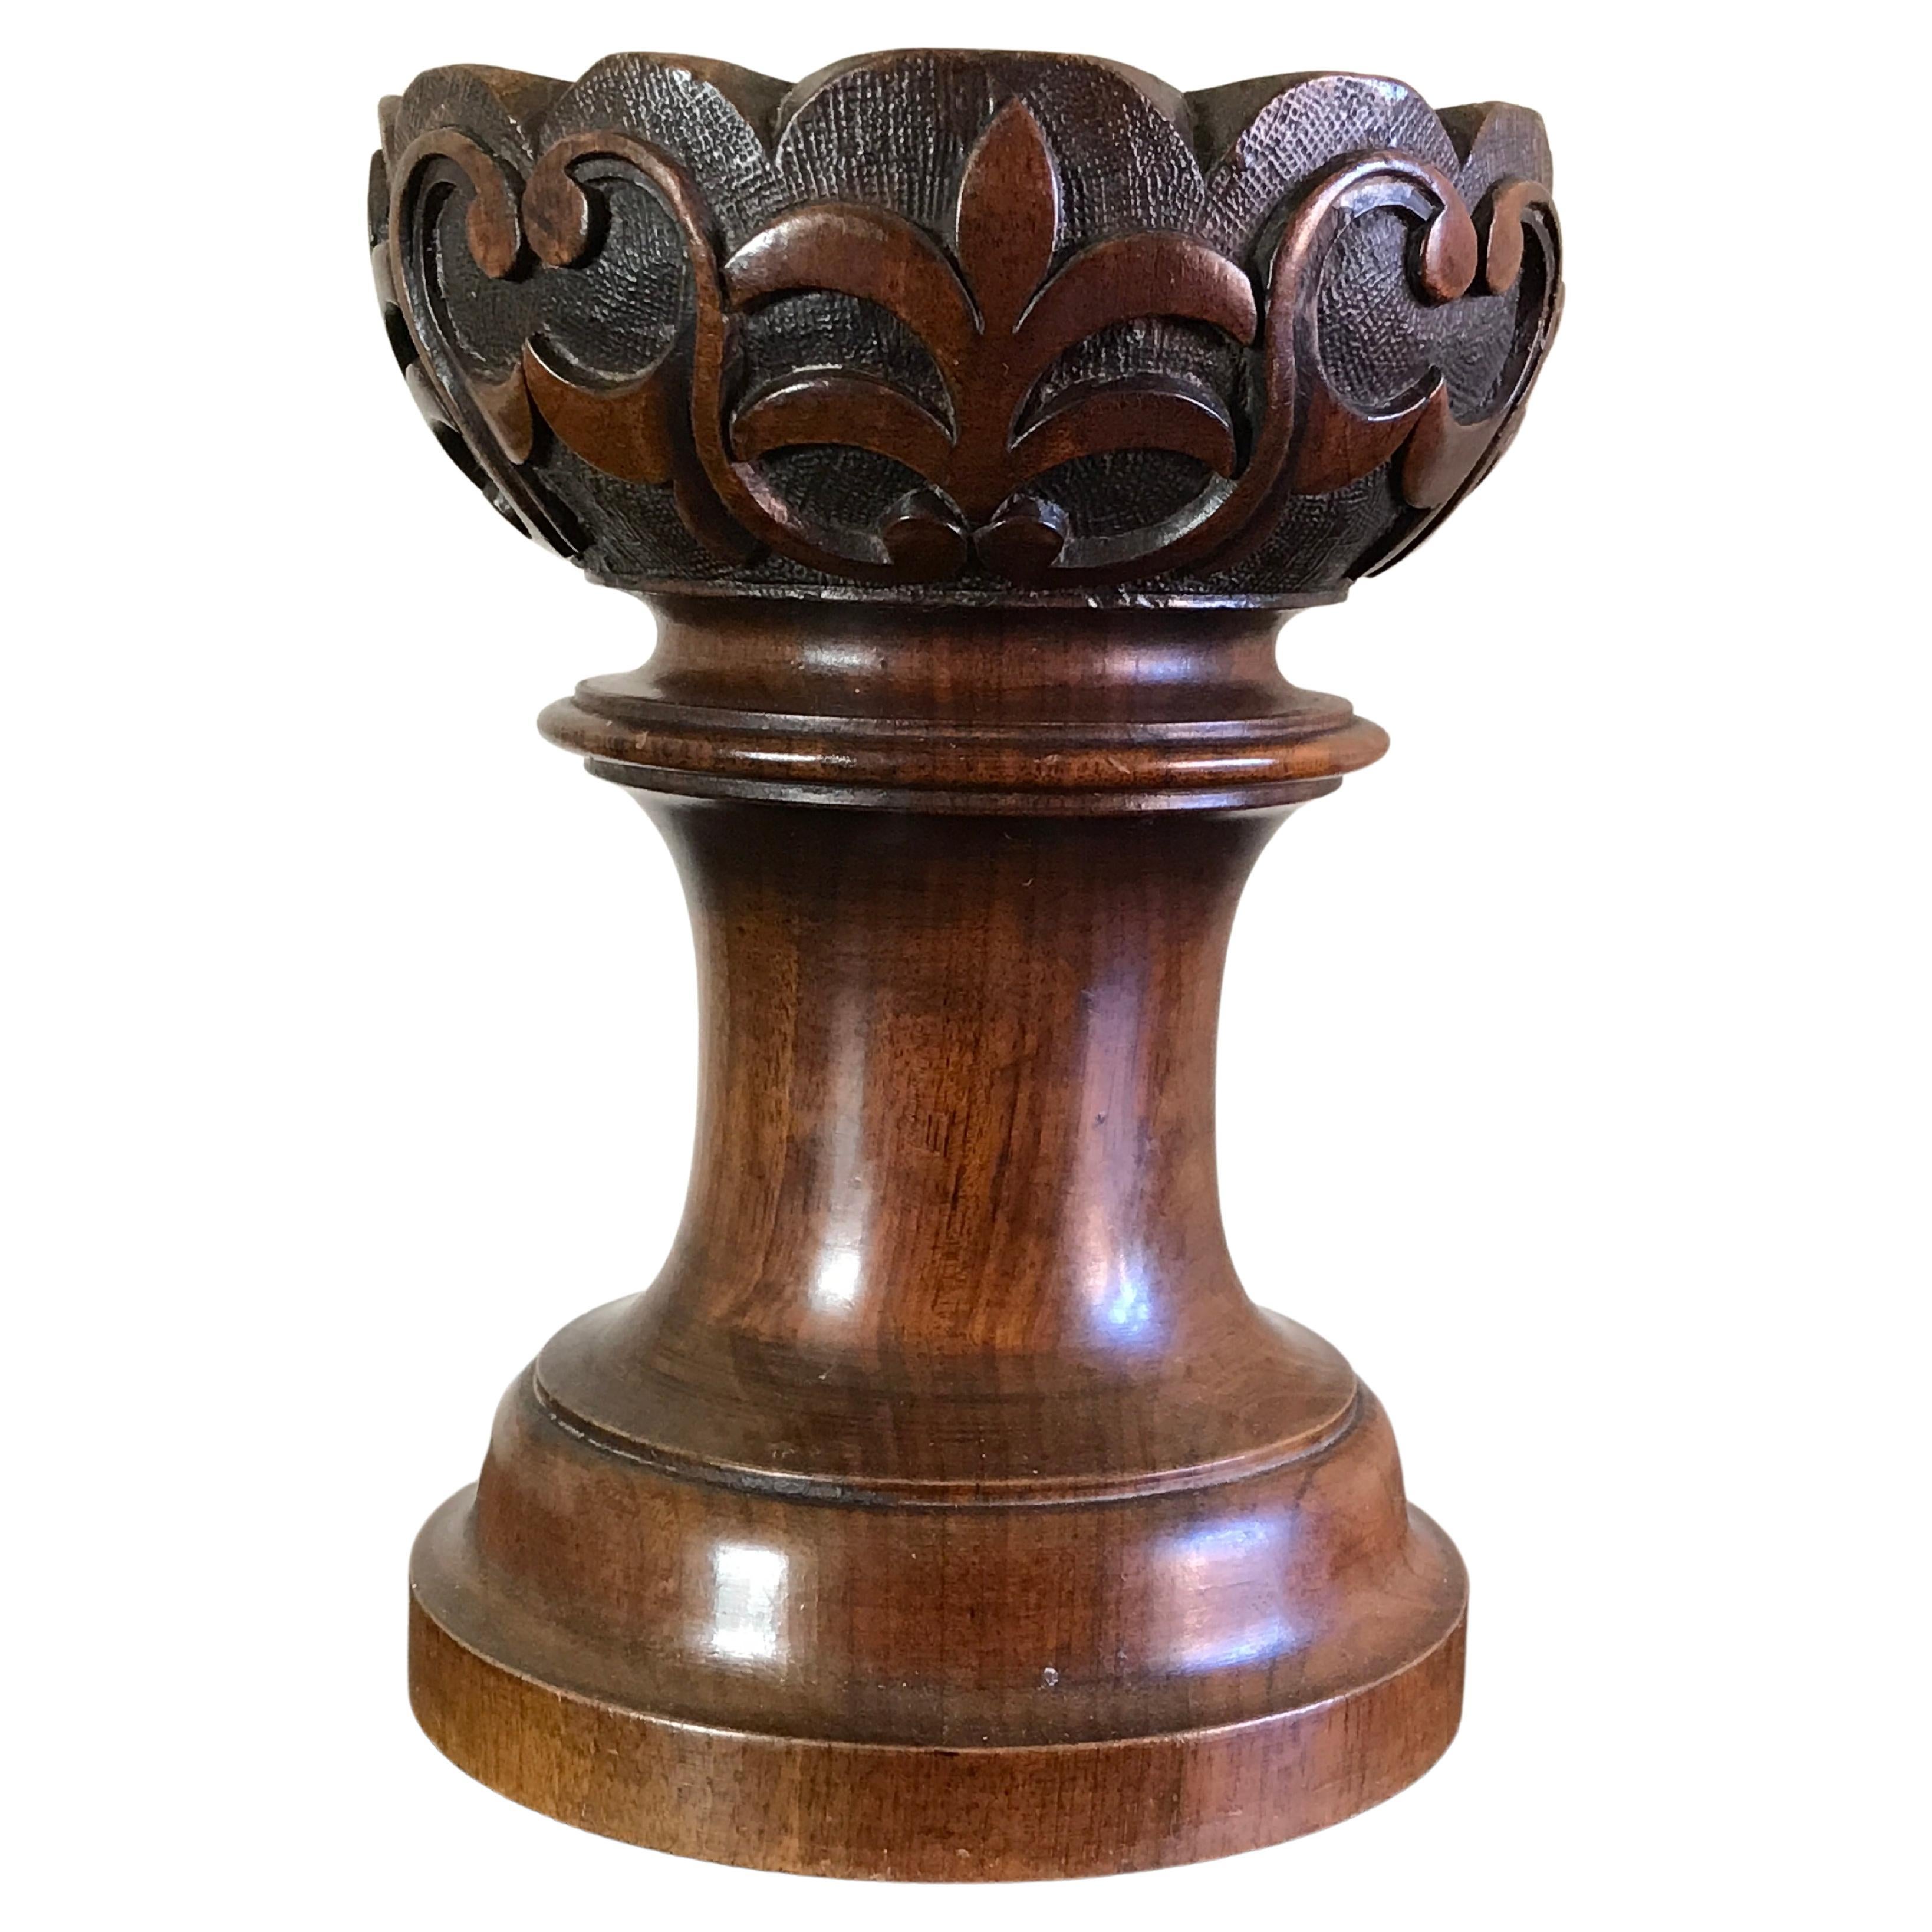 Holder Candle Petite Fours Sweets Mahogany Gothic Revival For Sale